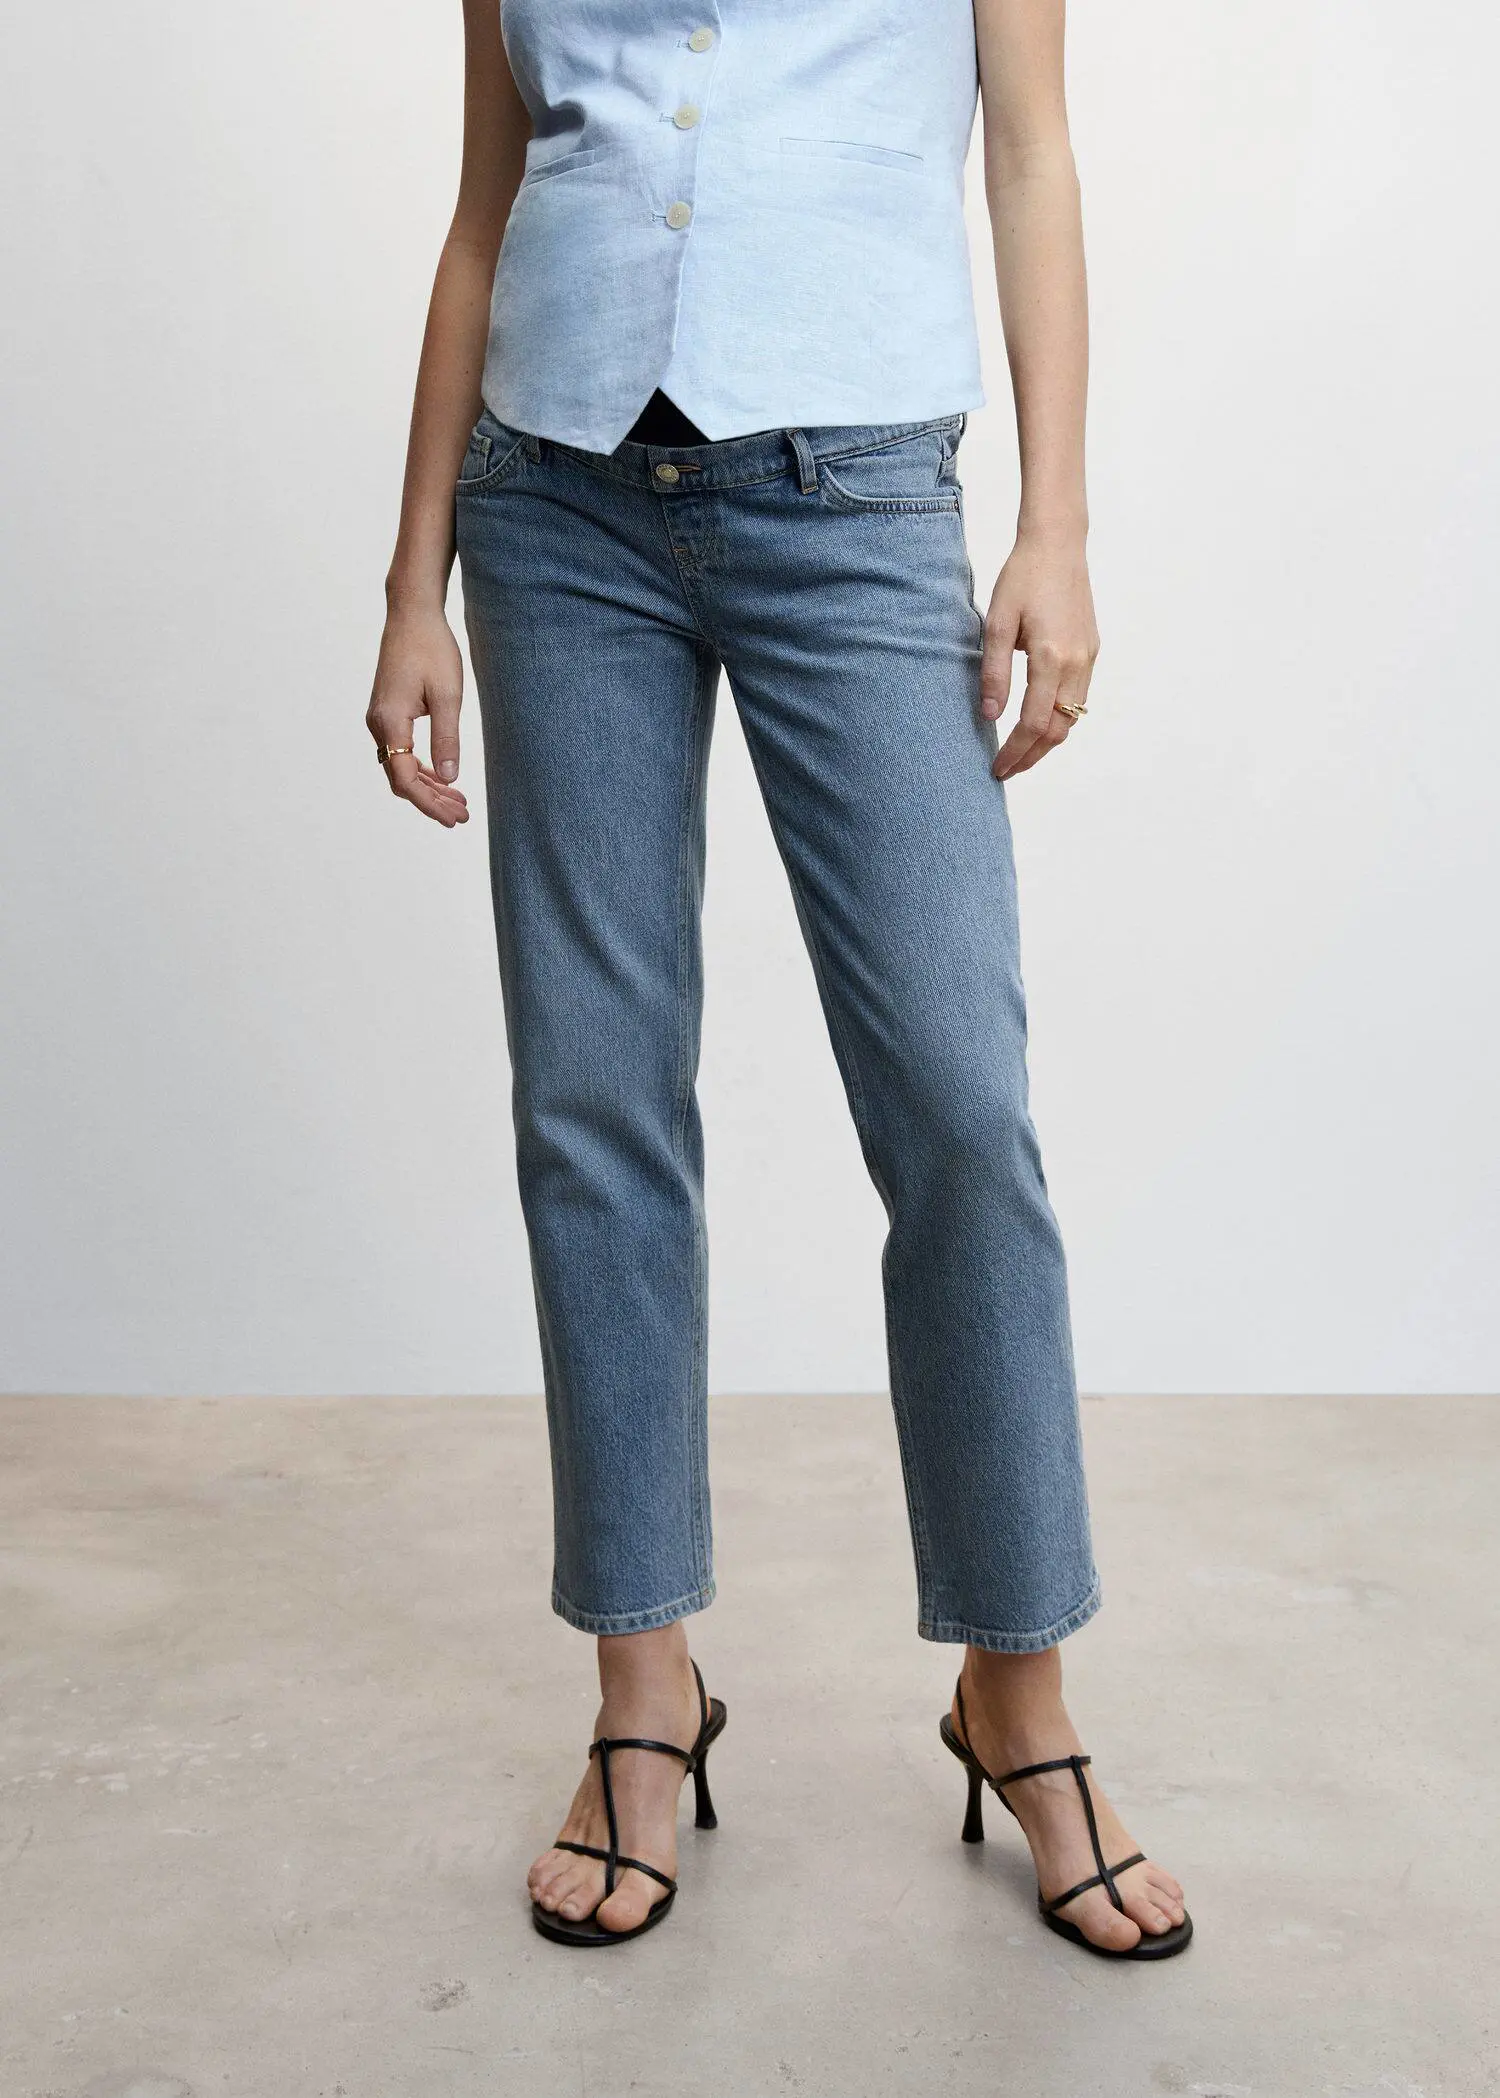 Mango Maternity Straight Jeans. a person wearing a pair of blue jeans and black heels. 